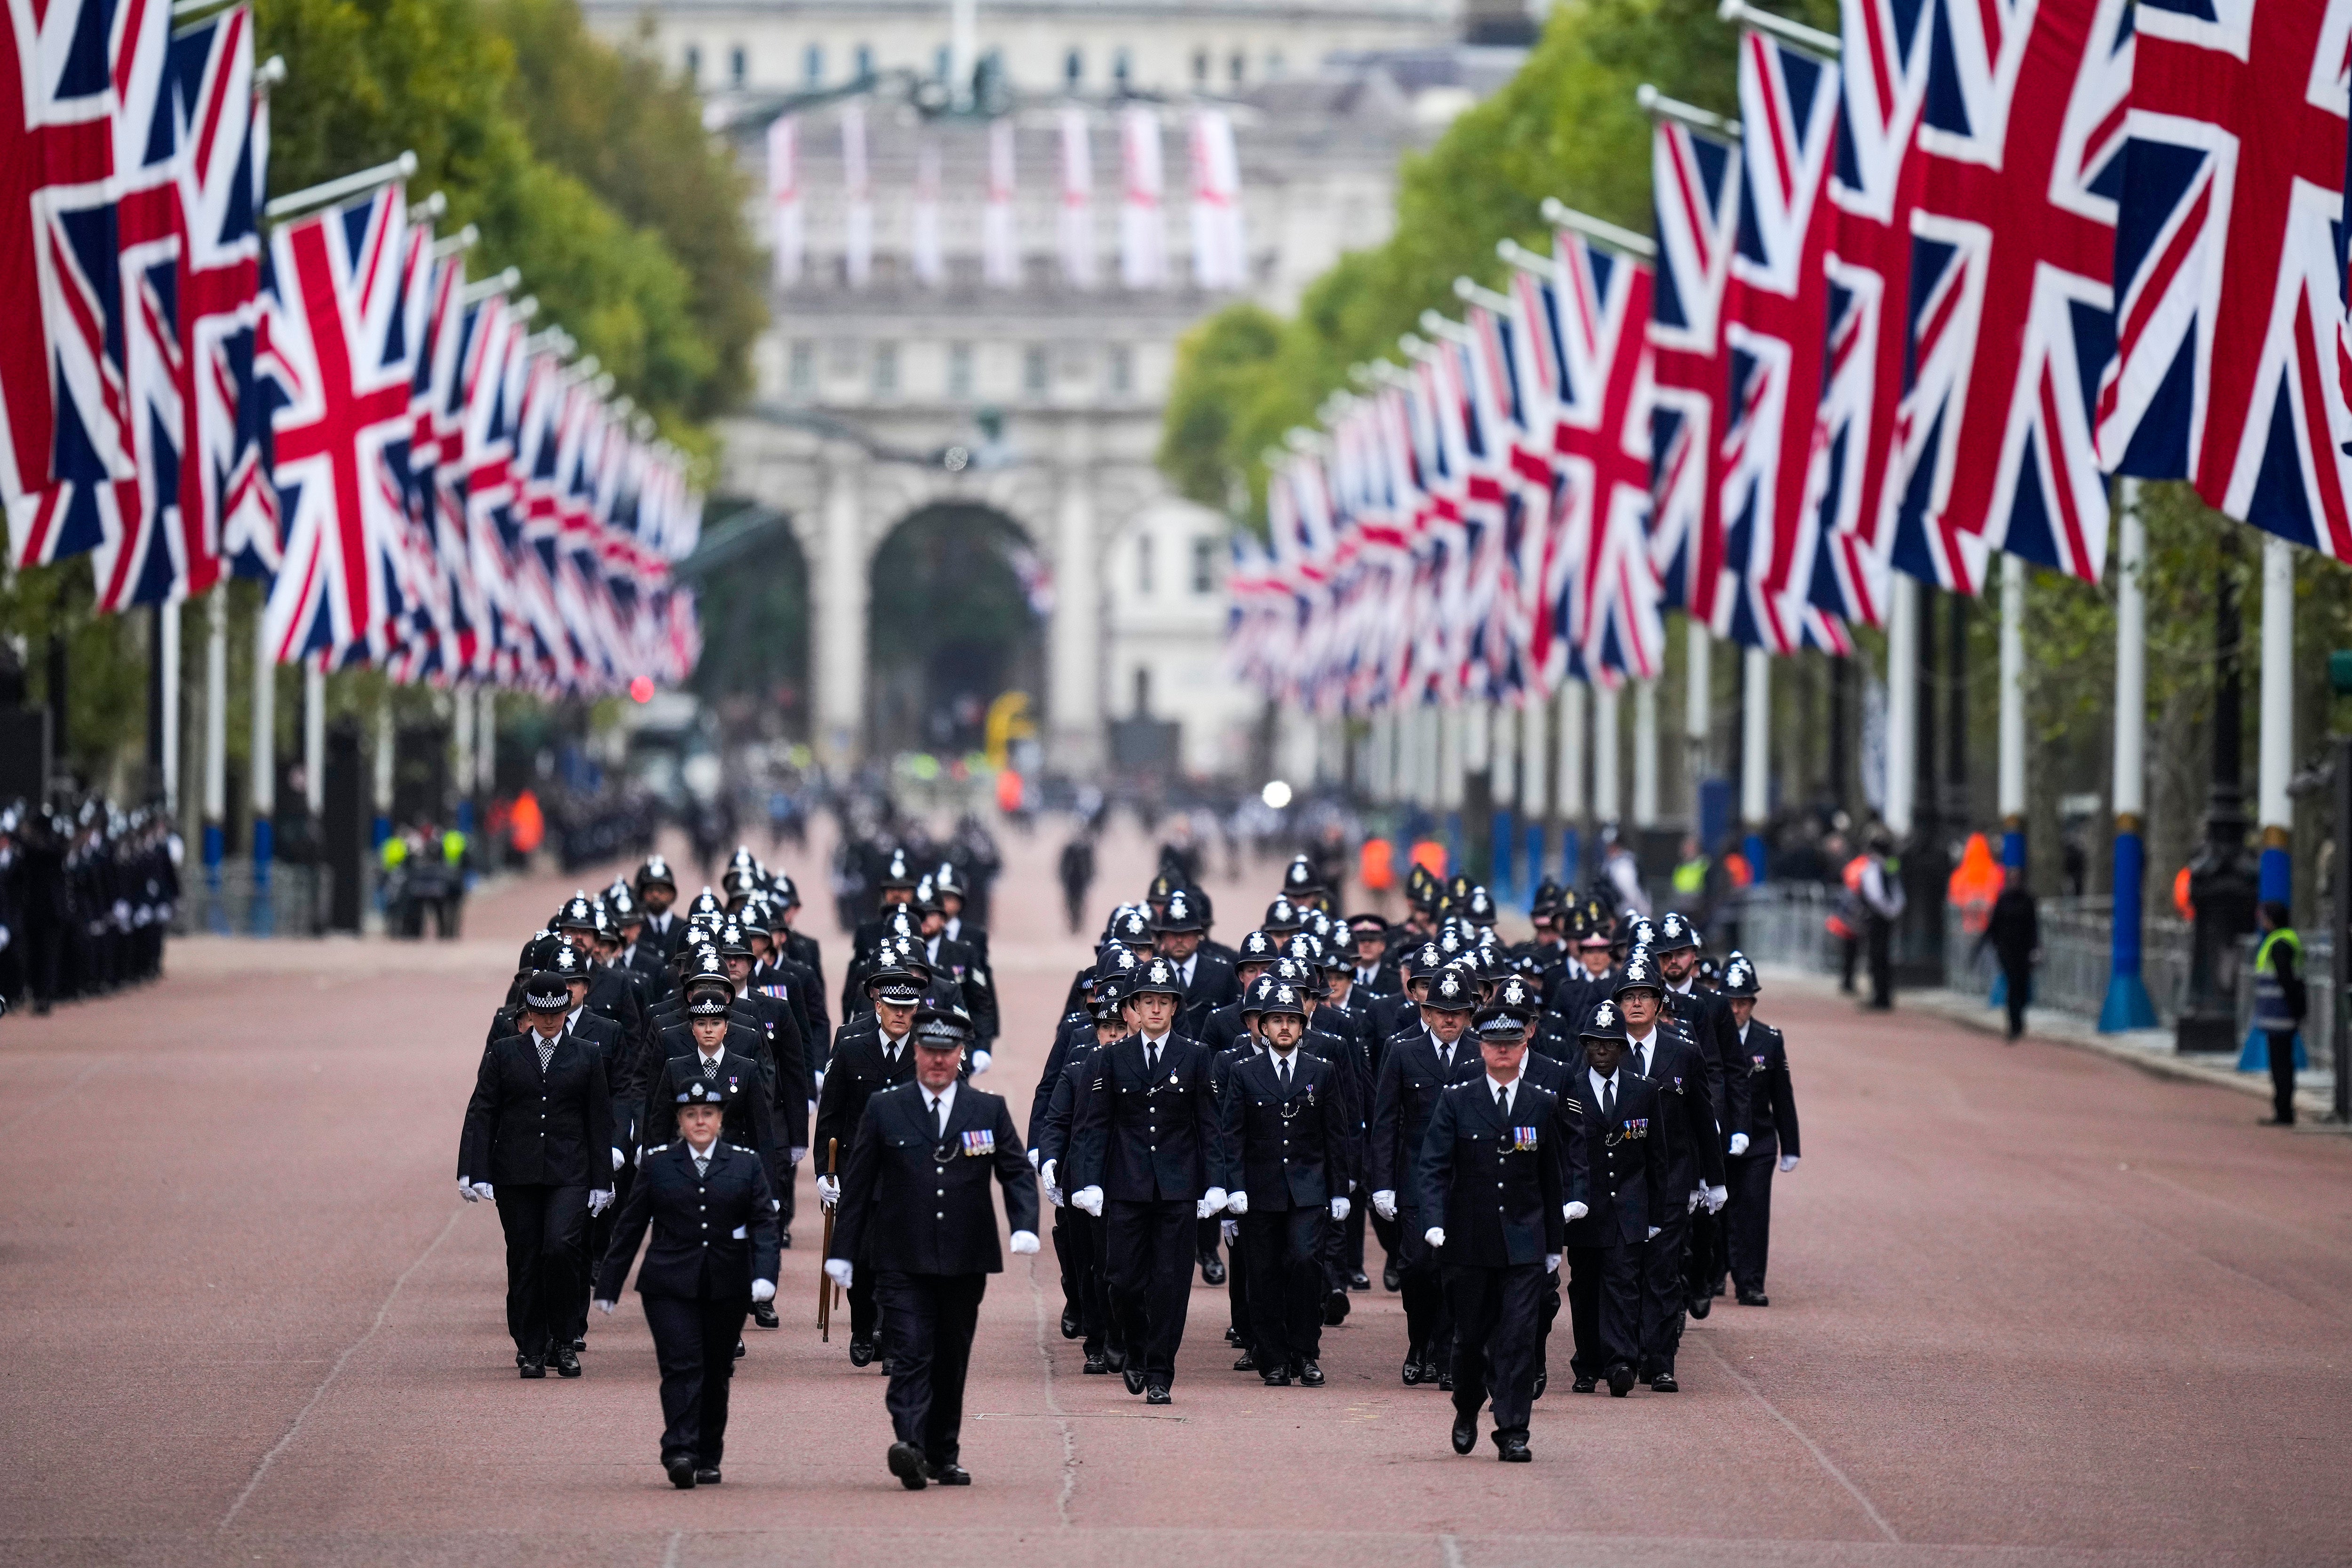 Thousands of police were brought in to cover the Queen’s funeral